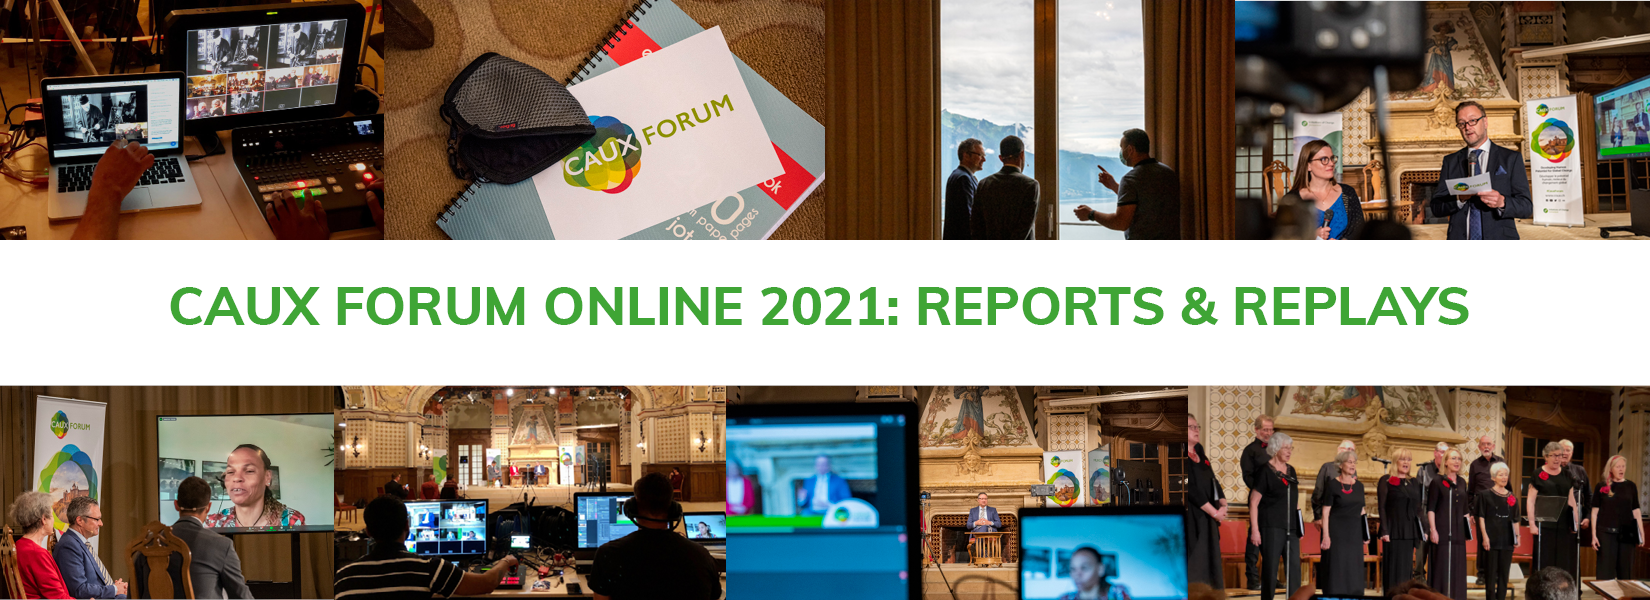 Caux Forum 2021  Reports & Replays